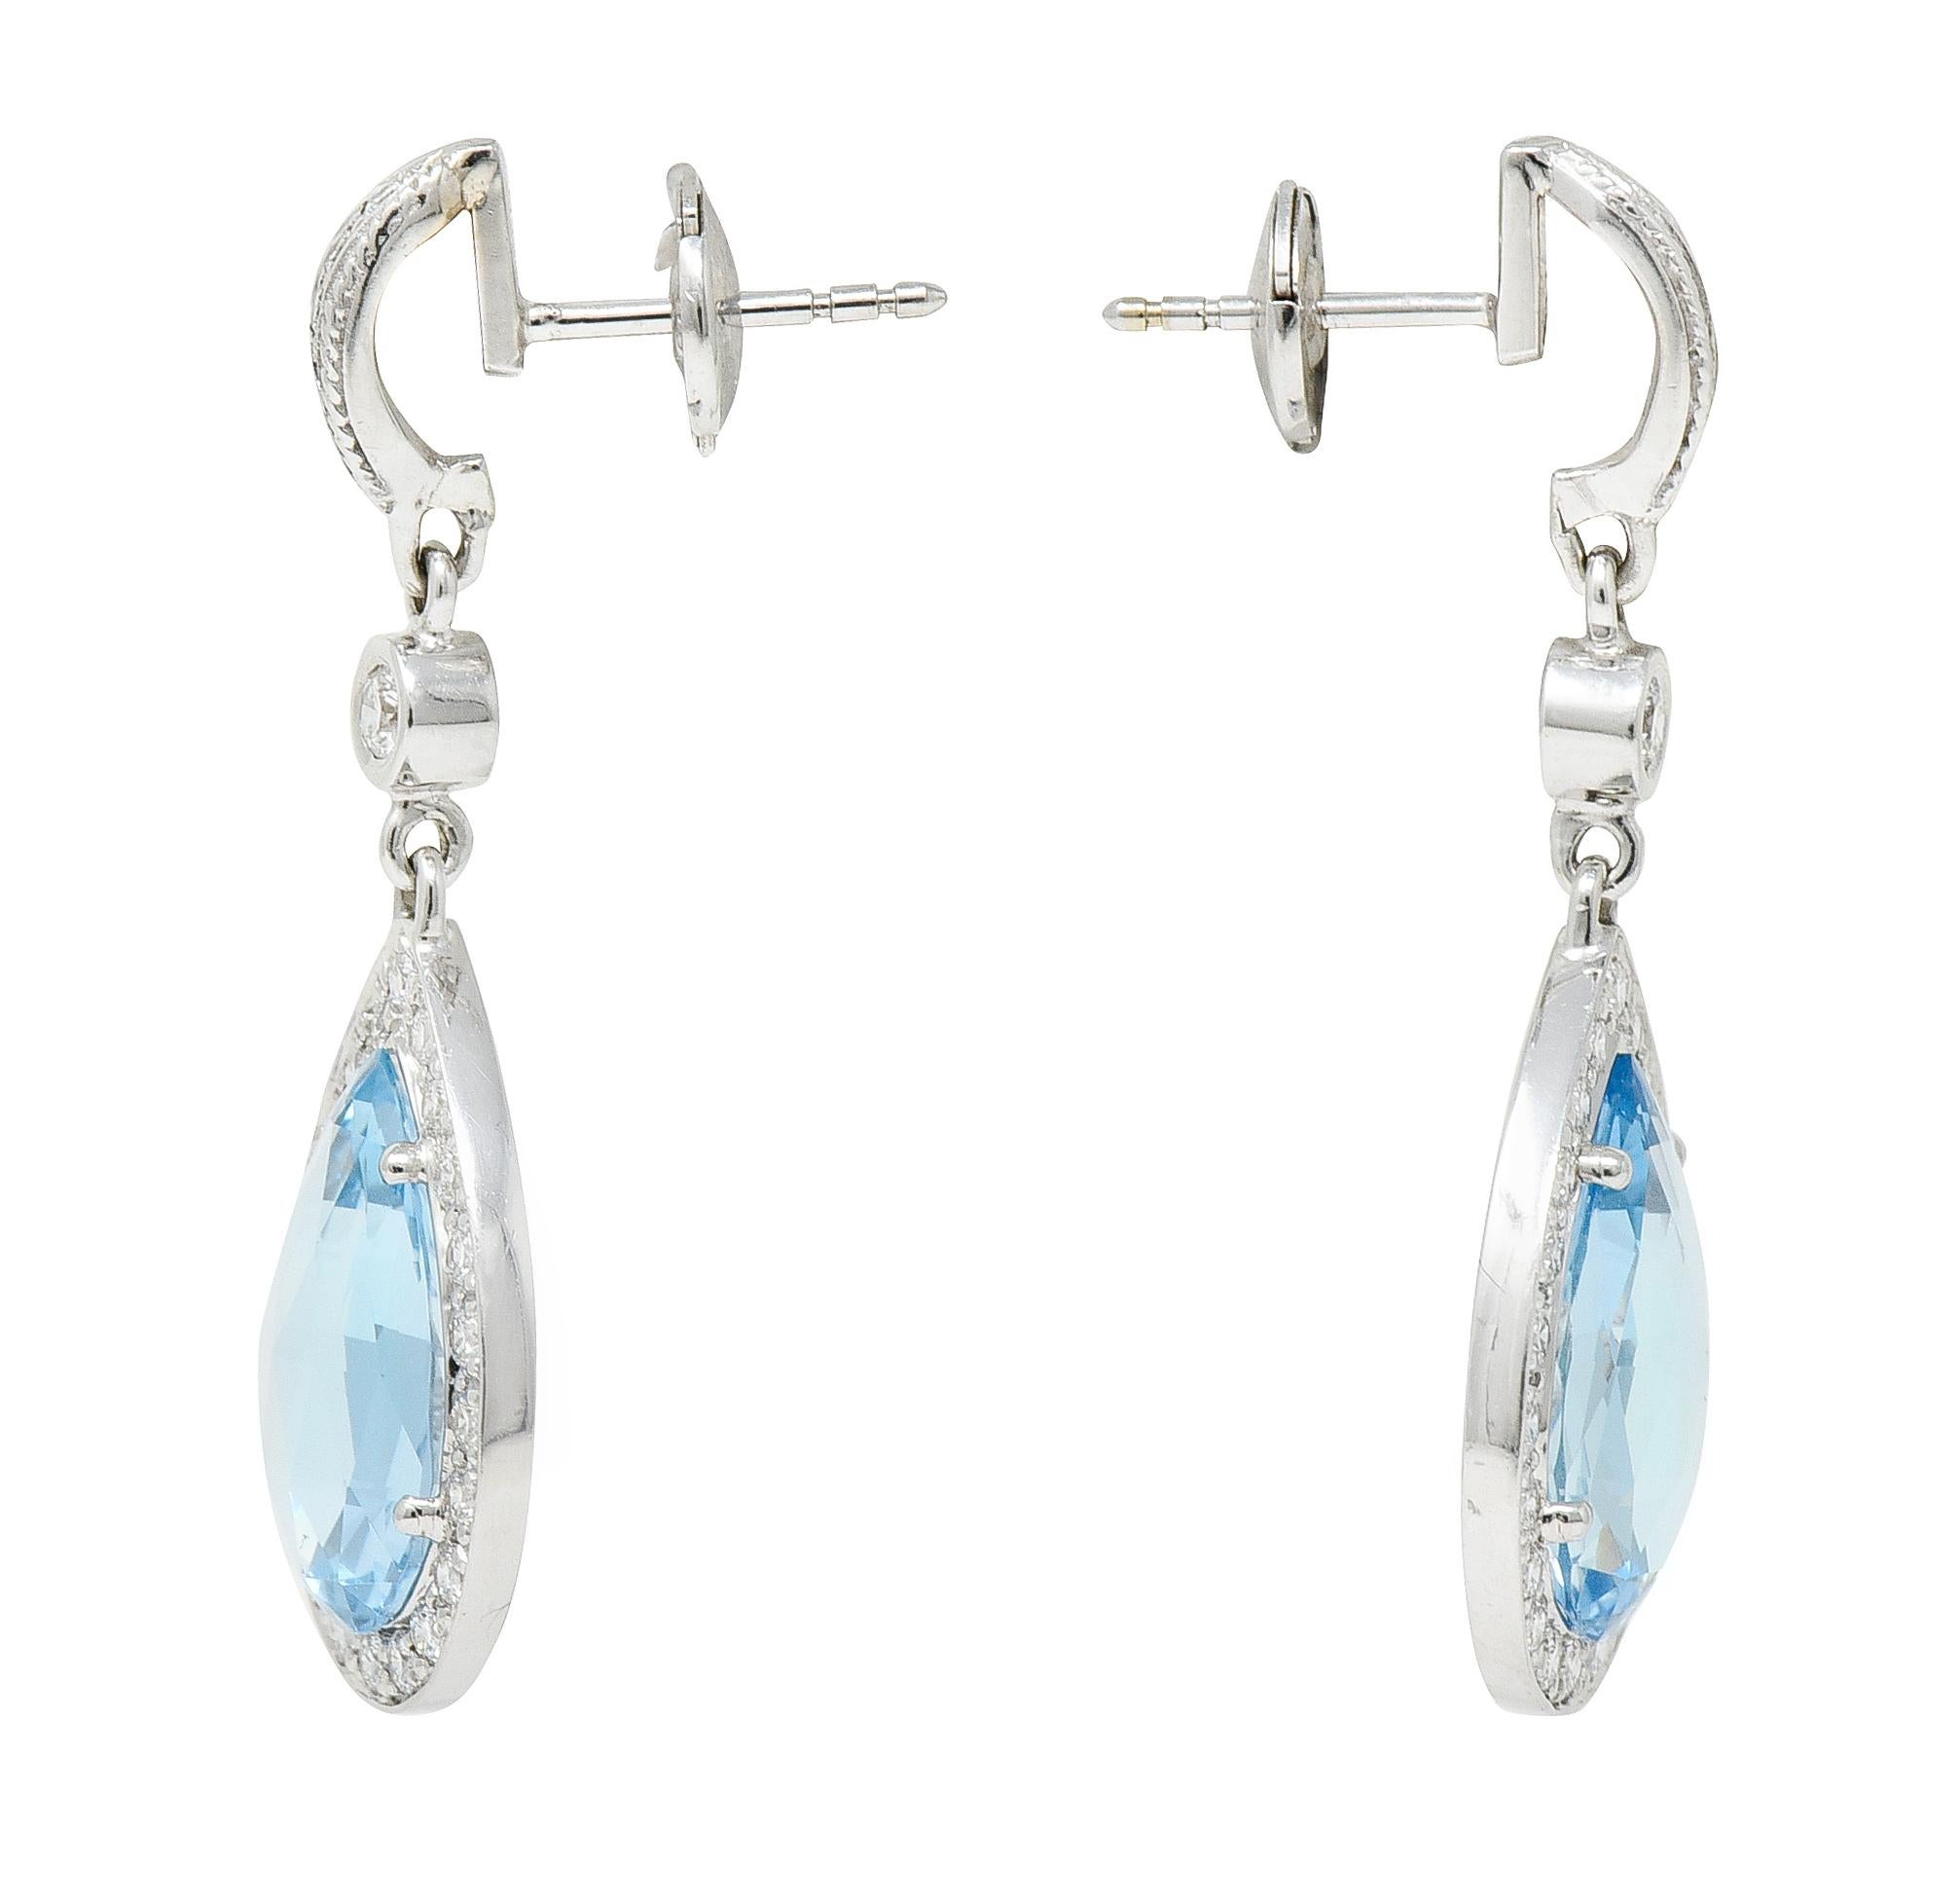 Earrings are designed as a half hoop surmount suspending an articulated drop

Drops feature faceted pear cut aquamarines weighing in total approximately 5.50 carats

Very well matched in medium light and slightly greenish blue color - eye